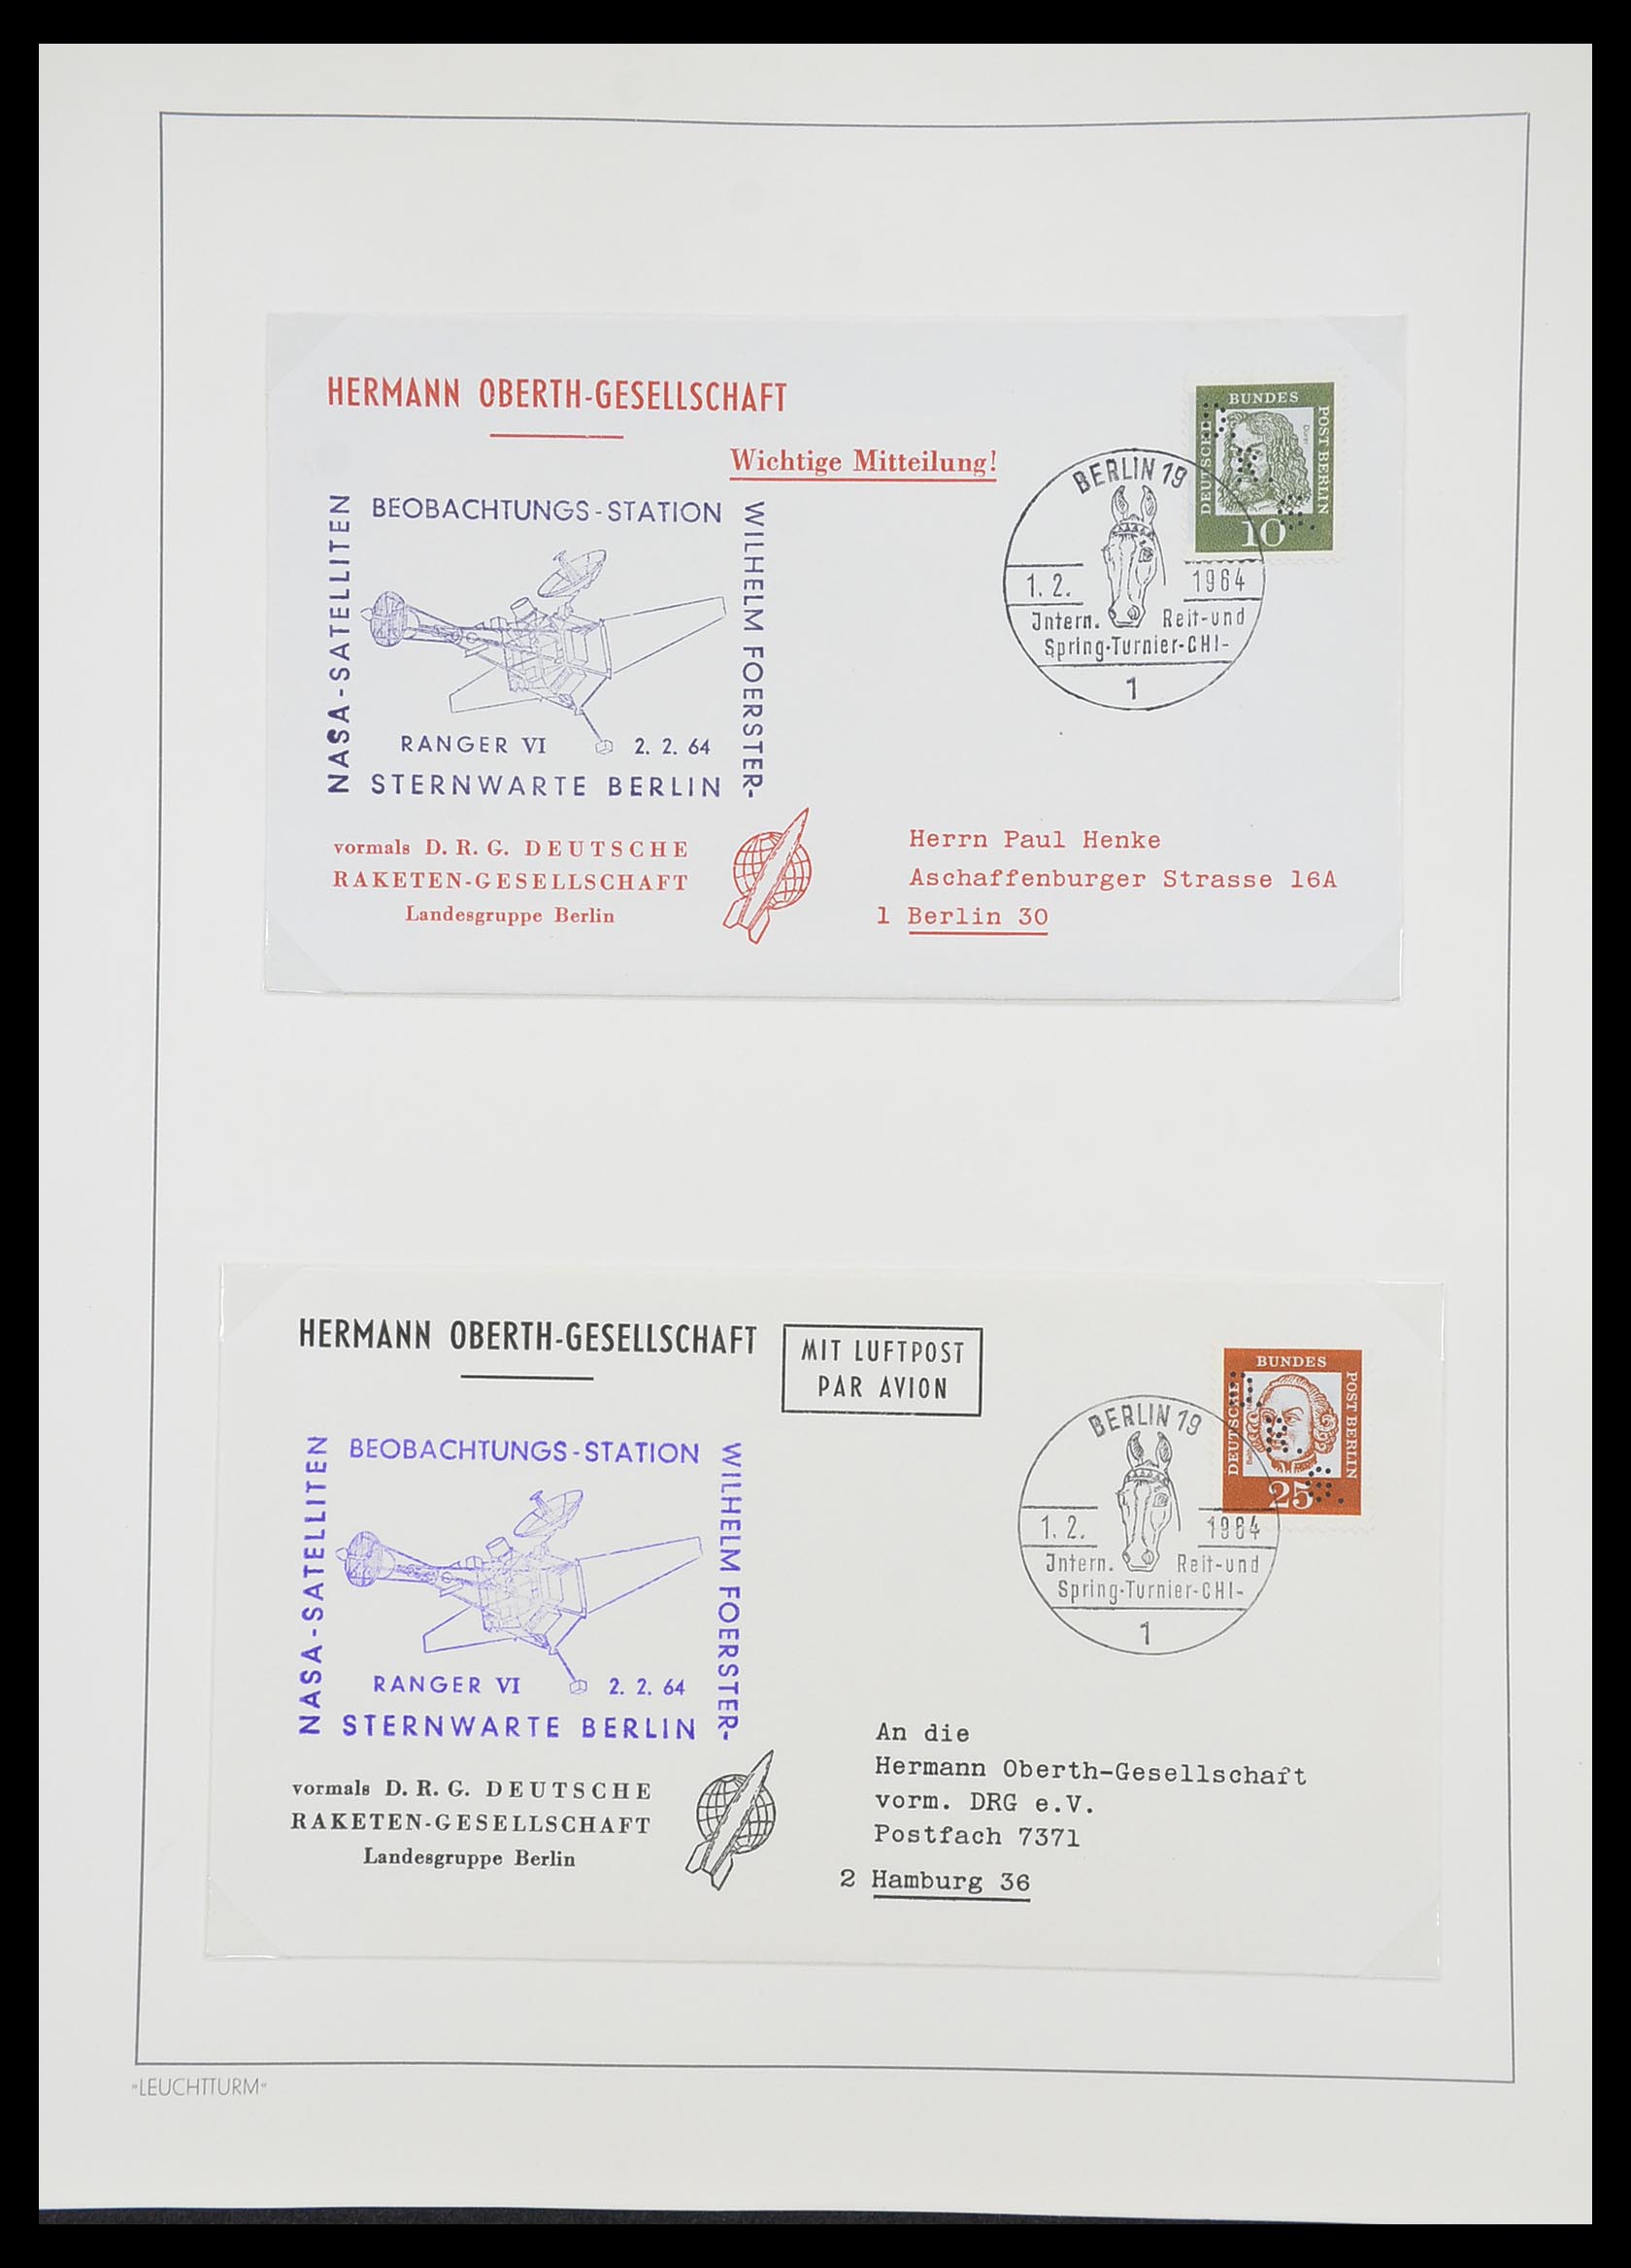 33463 121 - Stamp collection 33463 Rocket mail covers.